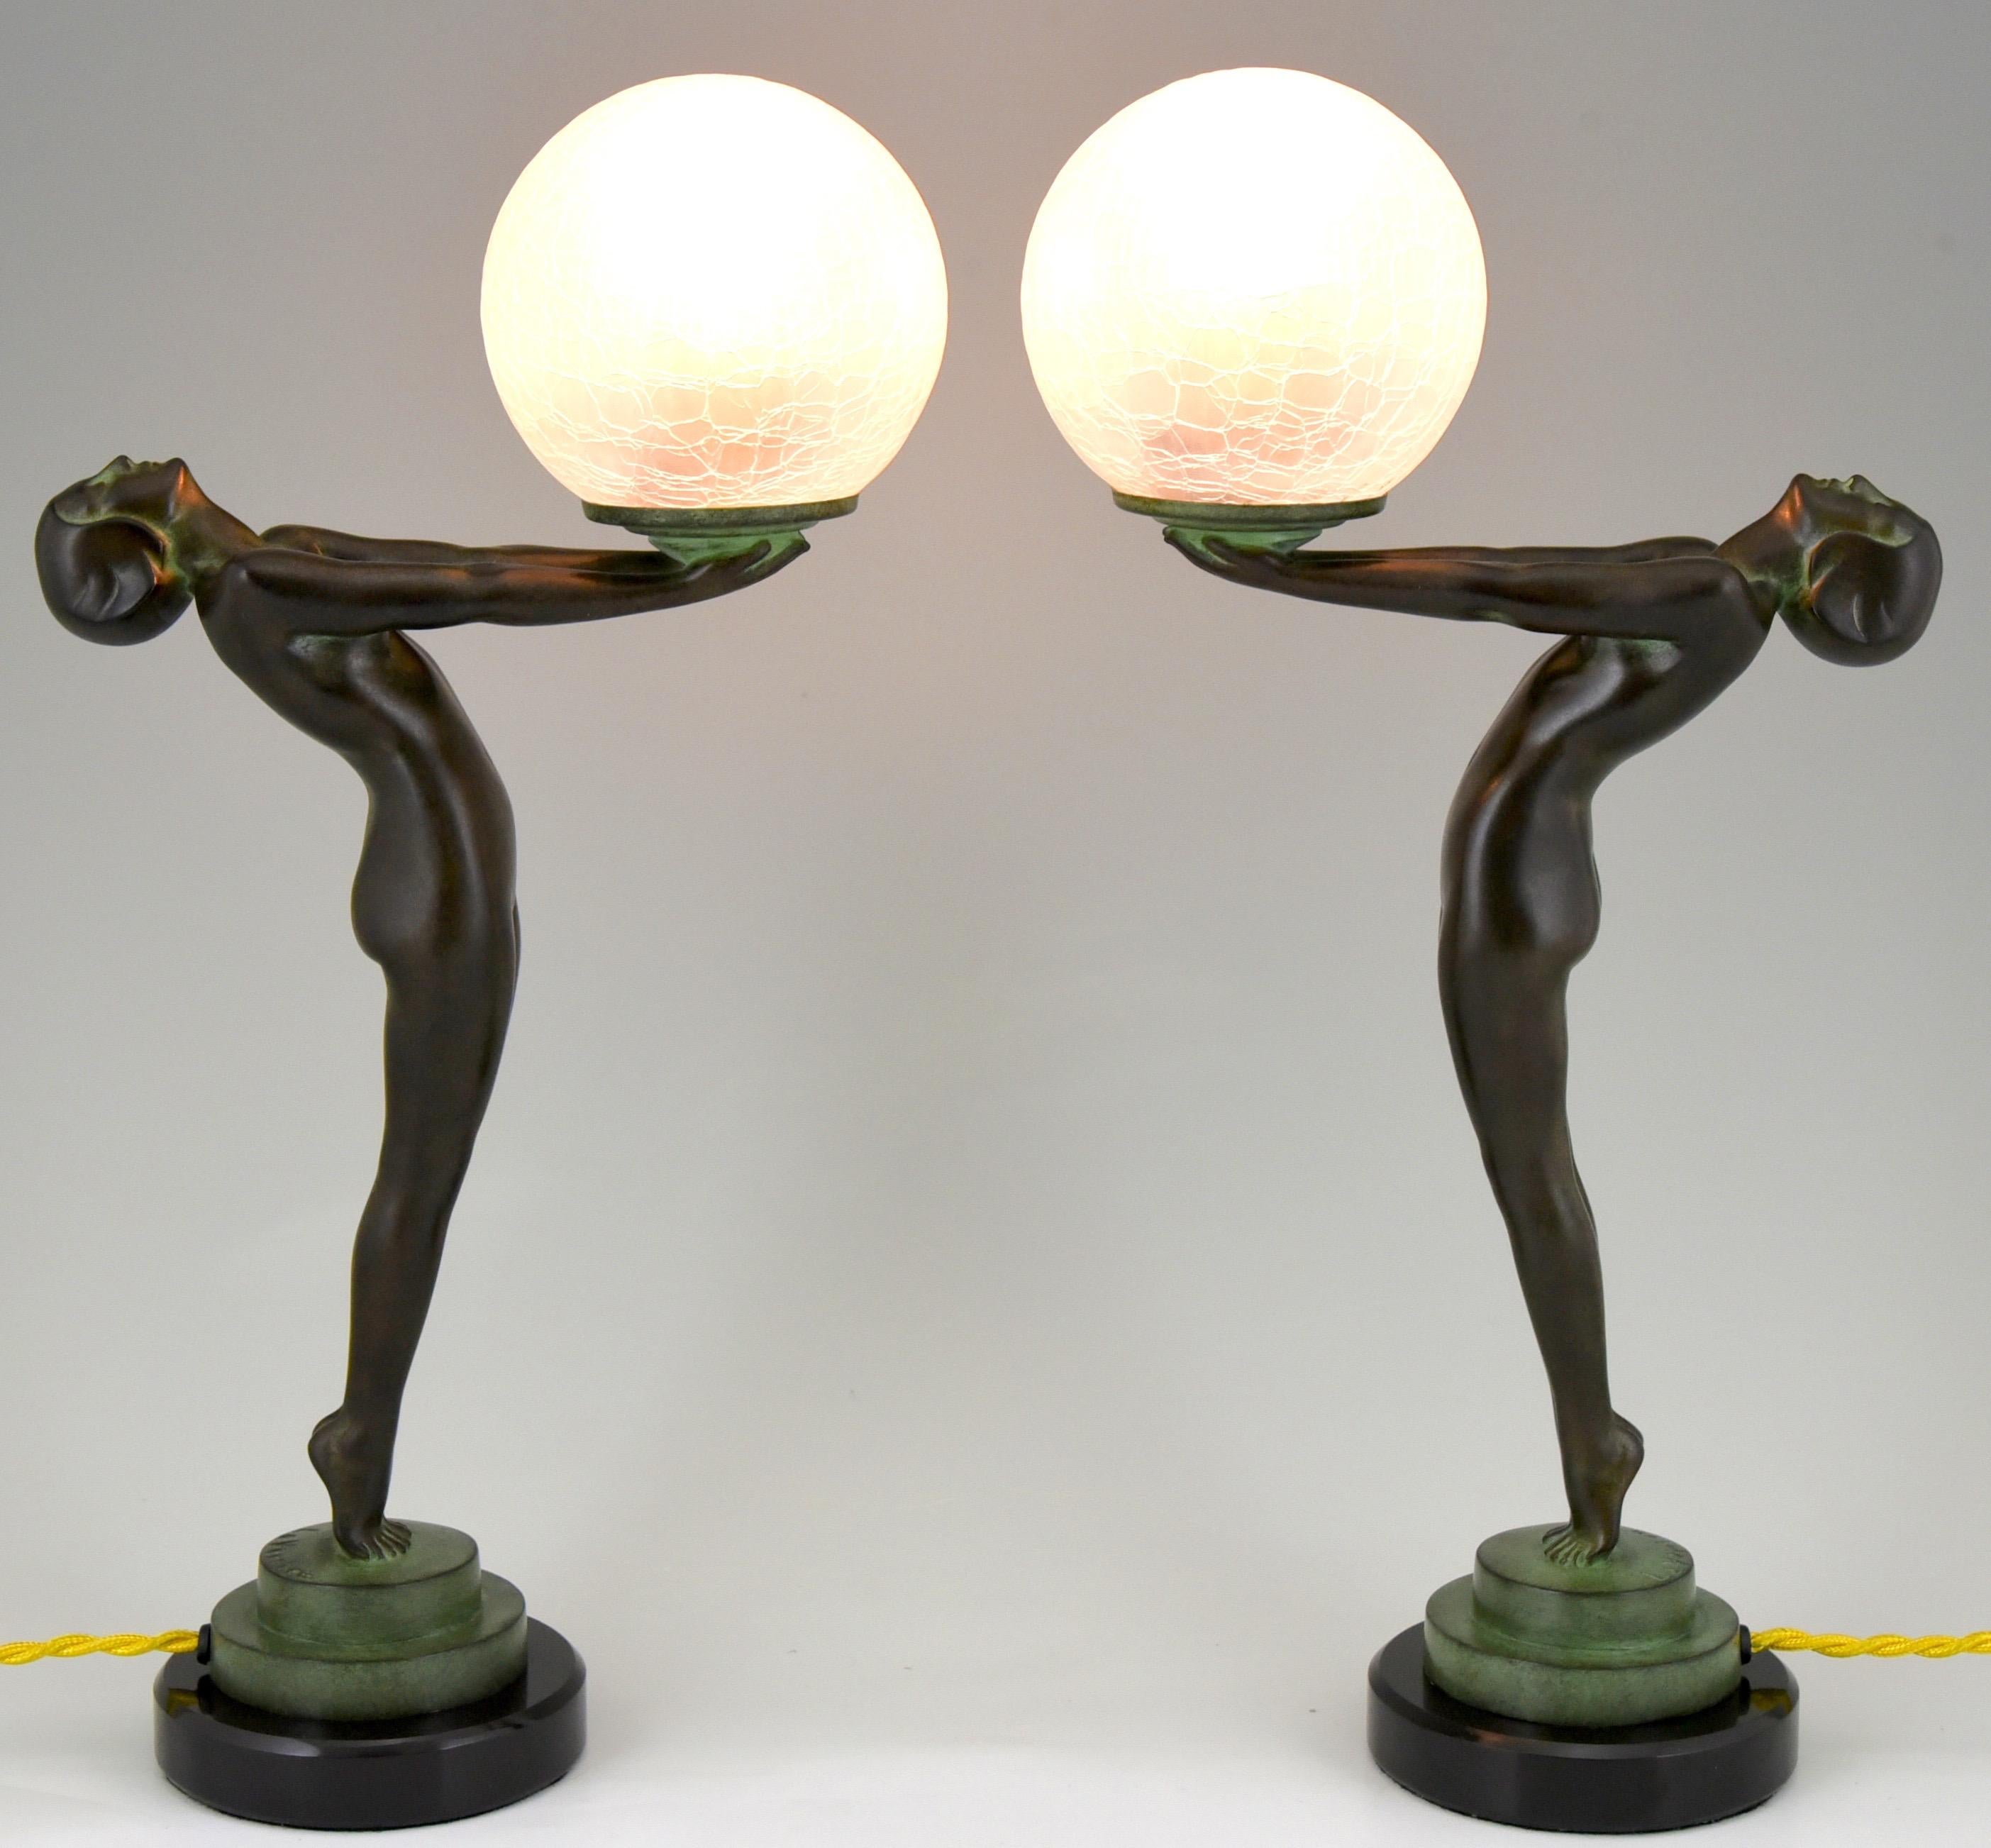 A PAIR of Art Deco style figural table lamps of a standing nude lady holding a glass globe.
This model is called Lueur lumineuse and is the smaller version of the iconic Clarté lamp by Max Le Verrier.
The lamp is signed and has the Le Verrier